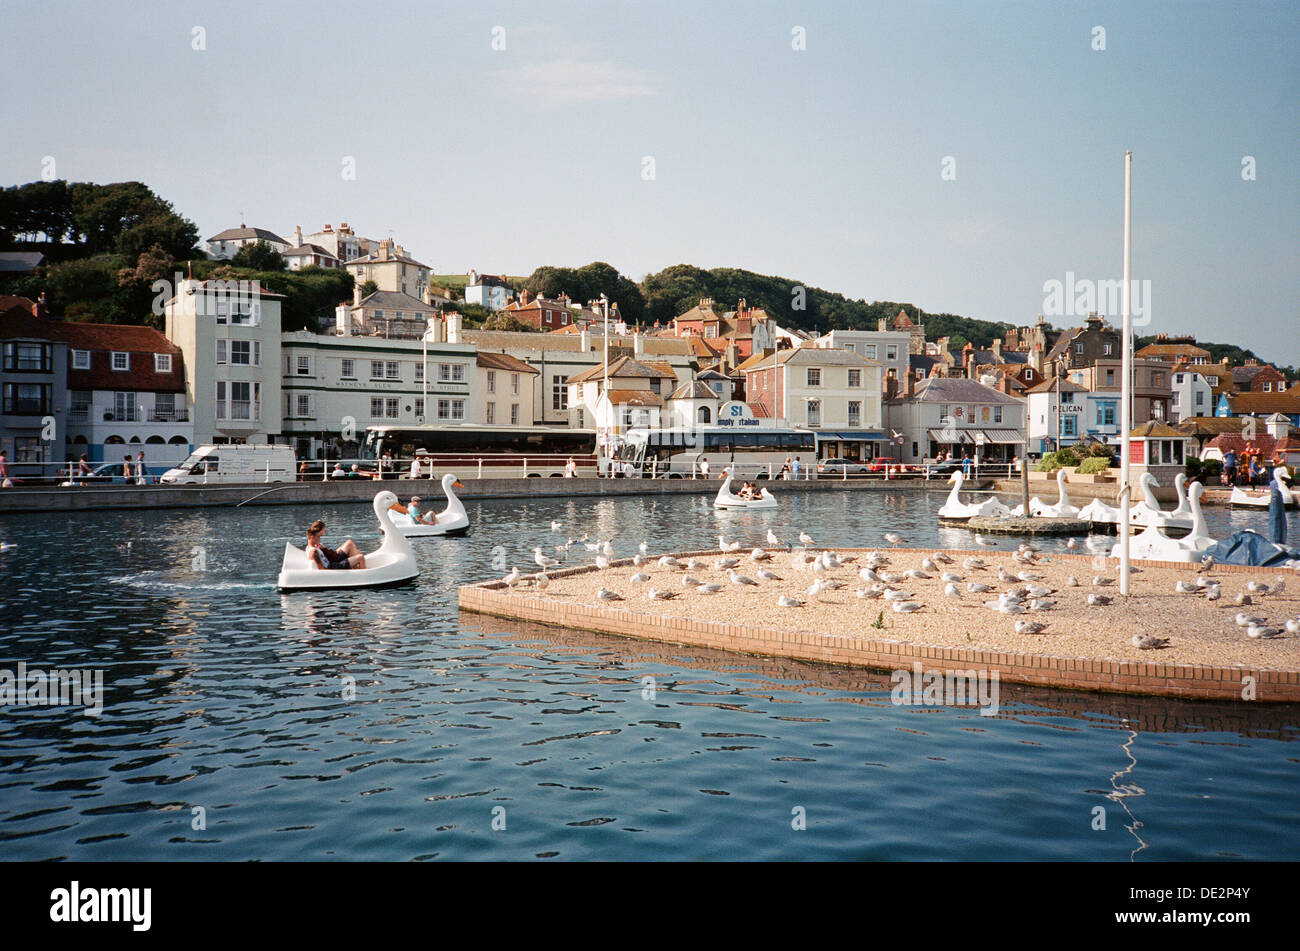 Boating lake on hastings front, East Sussex, UK Stock Photo